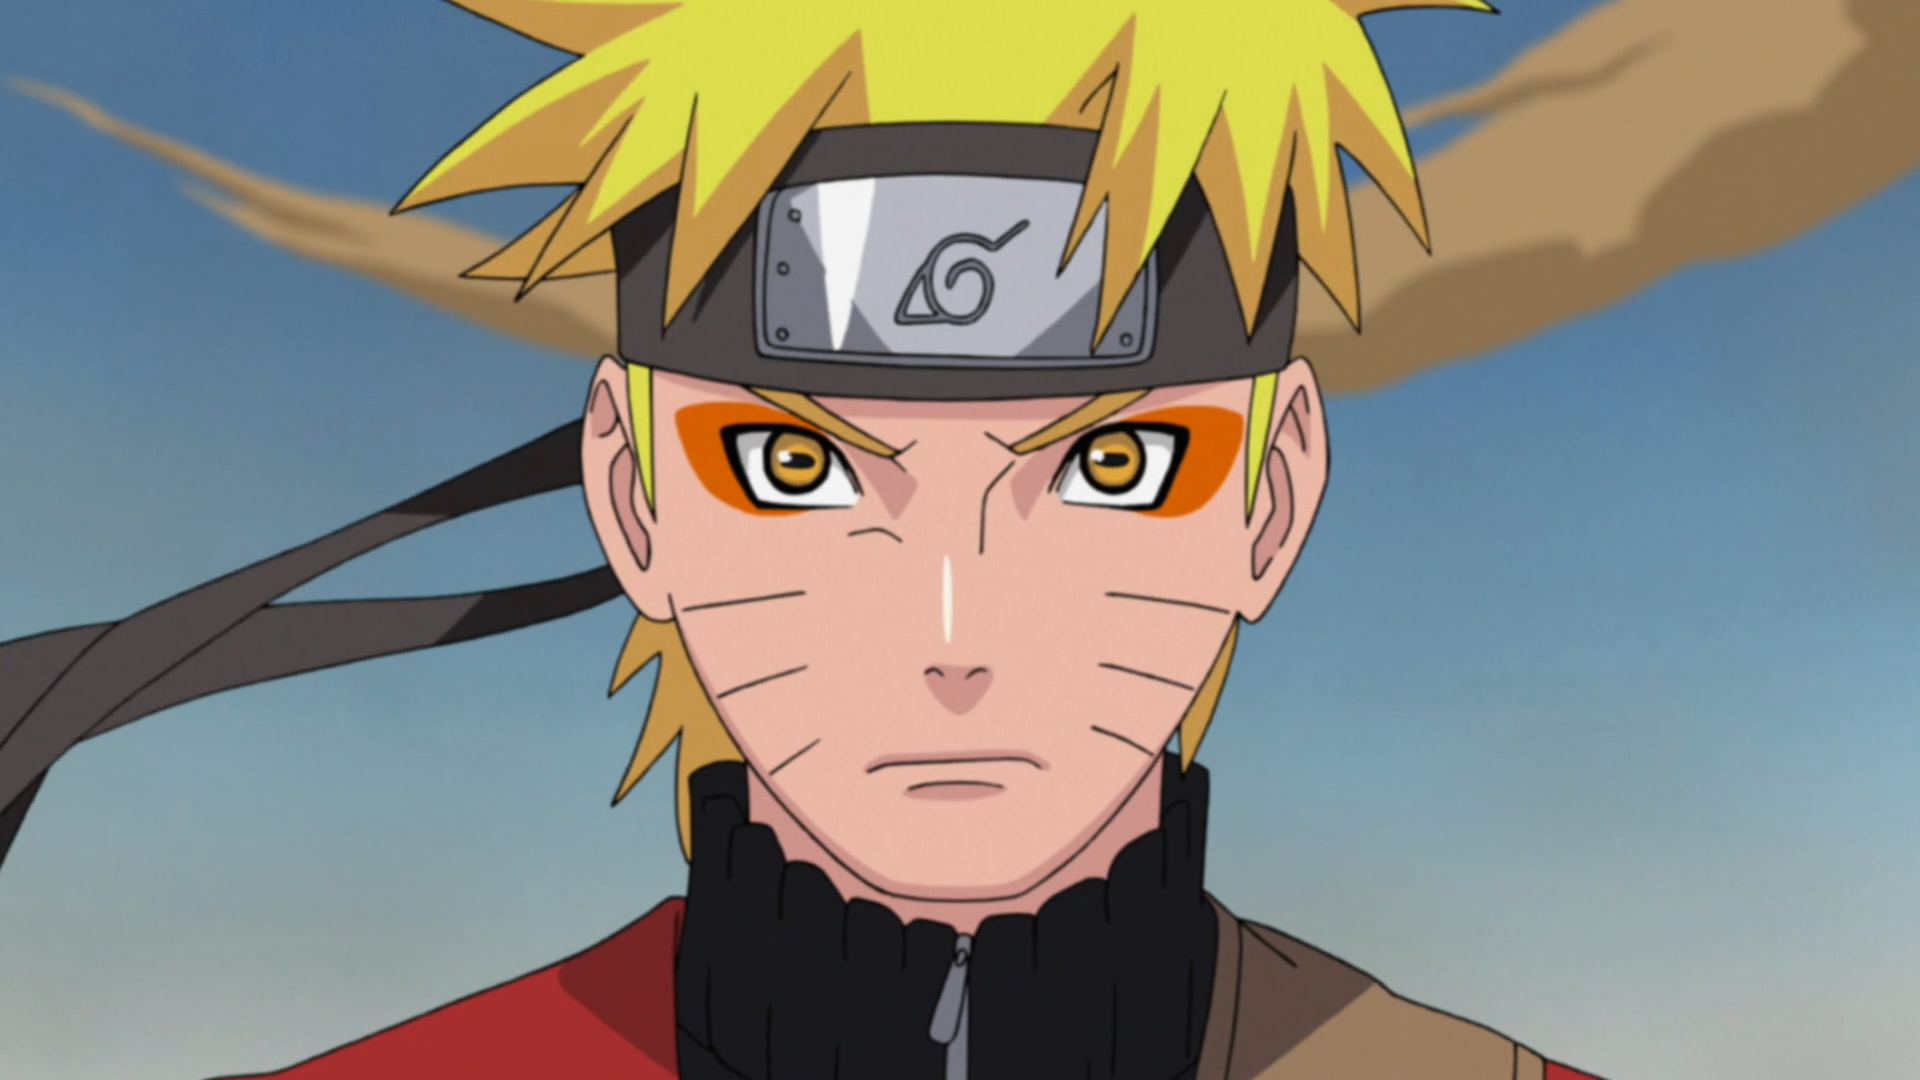 What Software Developers Can Learn From Naruto Uzumaki